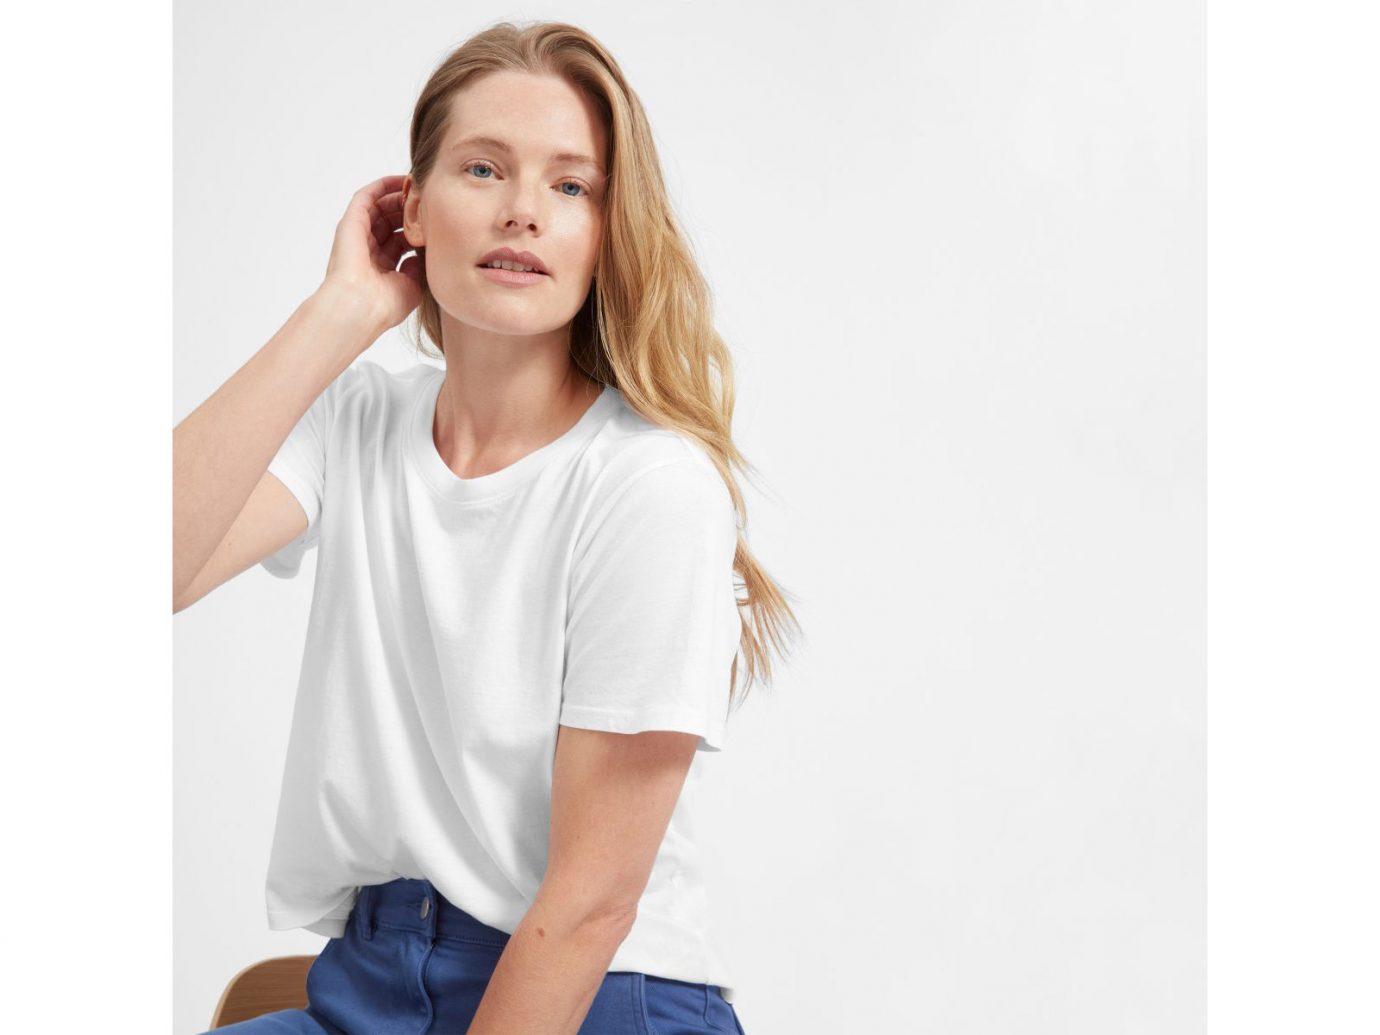 The 15 Best Women's Basic T-Shirts for 